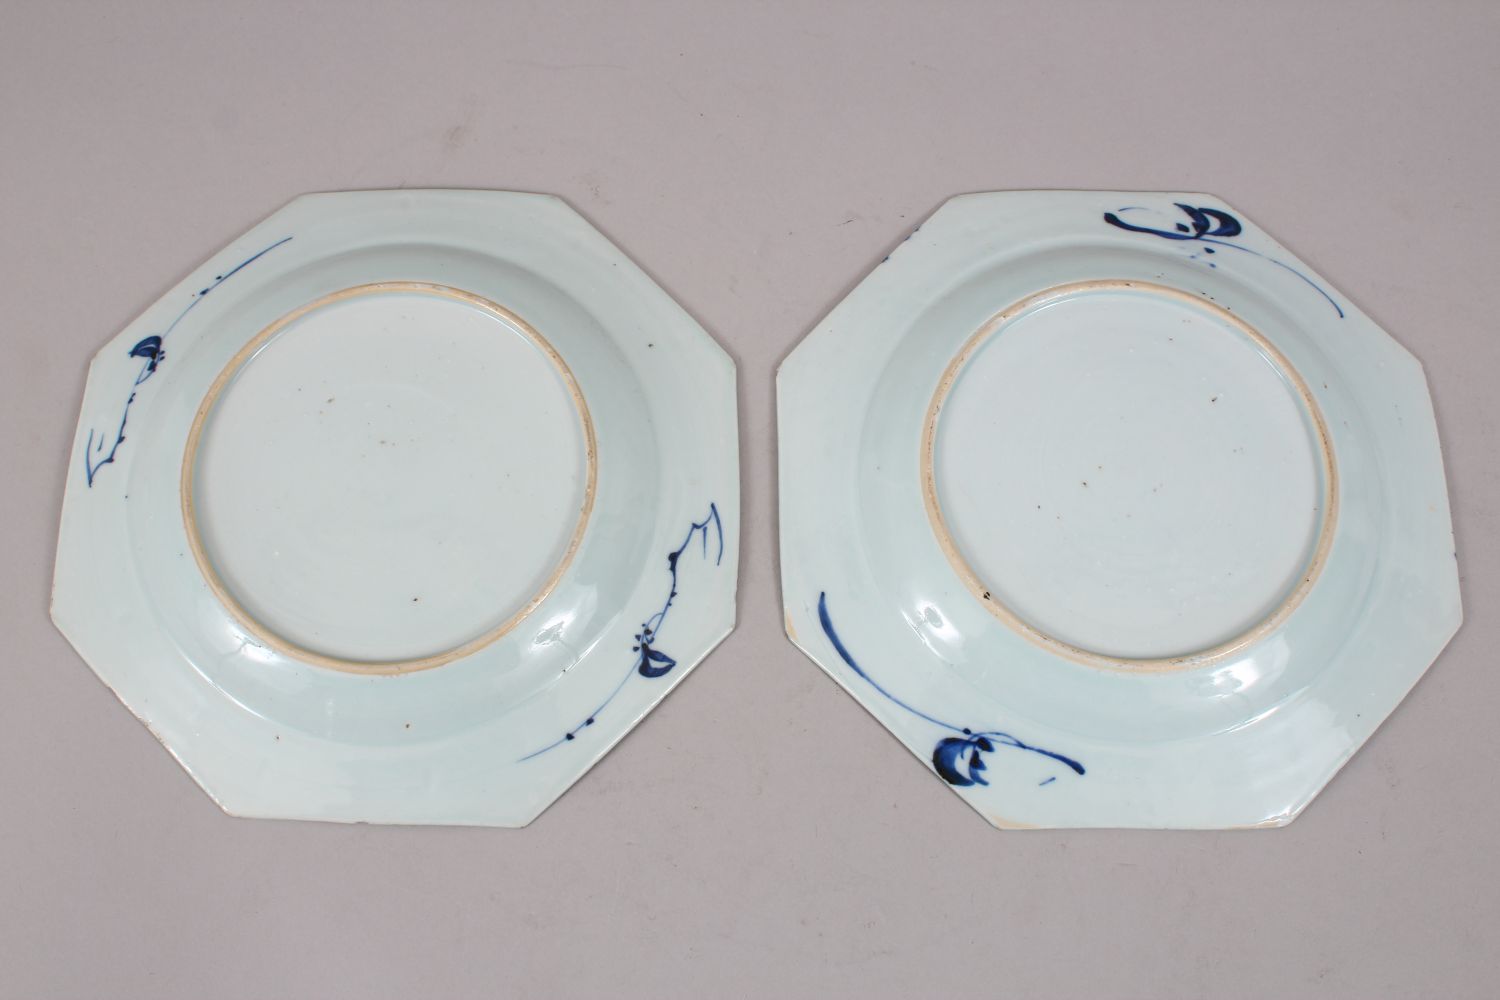 A PAIR OF 18TH CENTURY CHINESE BLUE & WHITE PORCELAIN OCTAGONAL PLATES, both decorated with - Image 4 of 4